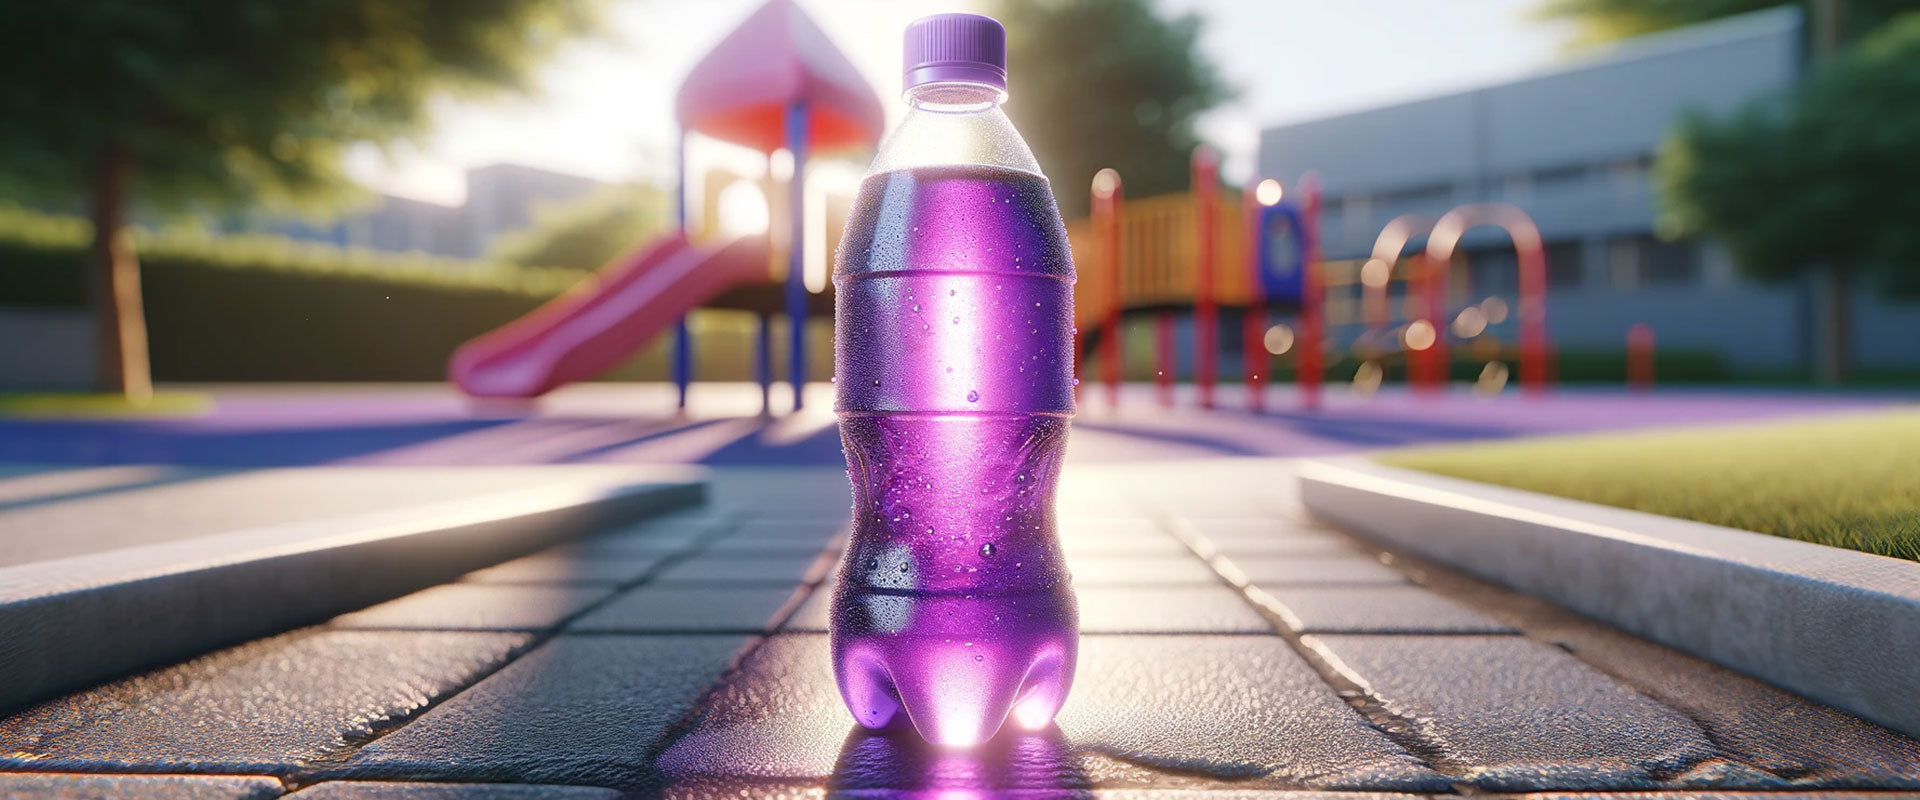 purple food coloring soda bottle on a playground with sun shining through the purple colored liquid